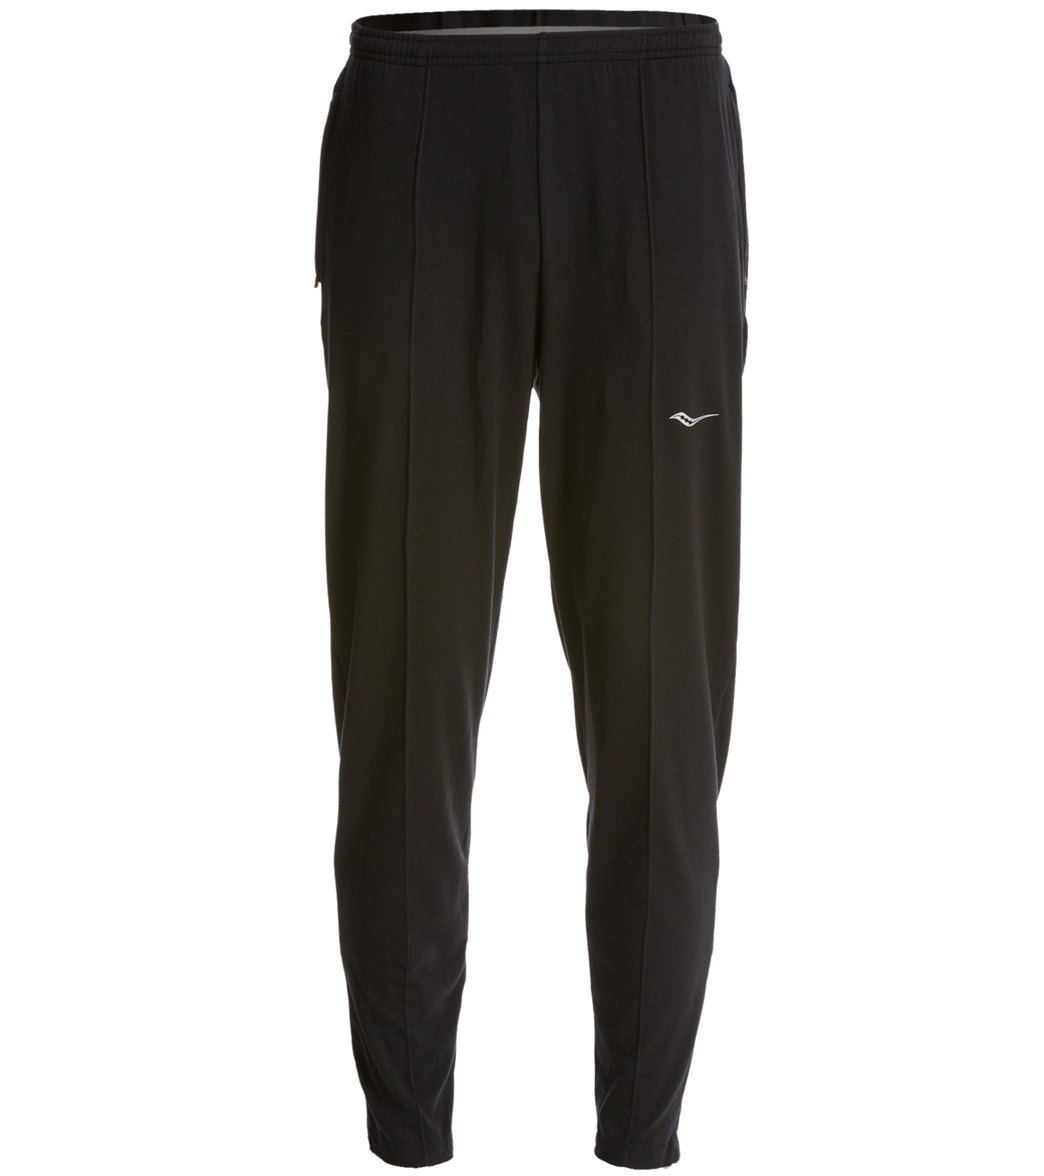 Saucony Men's Boston Running Pant at SwimOutlet.com - Free Shipping